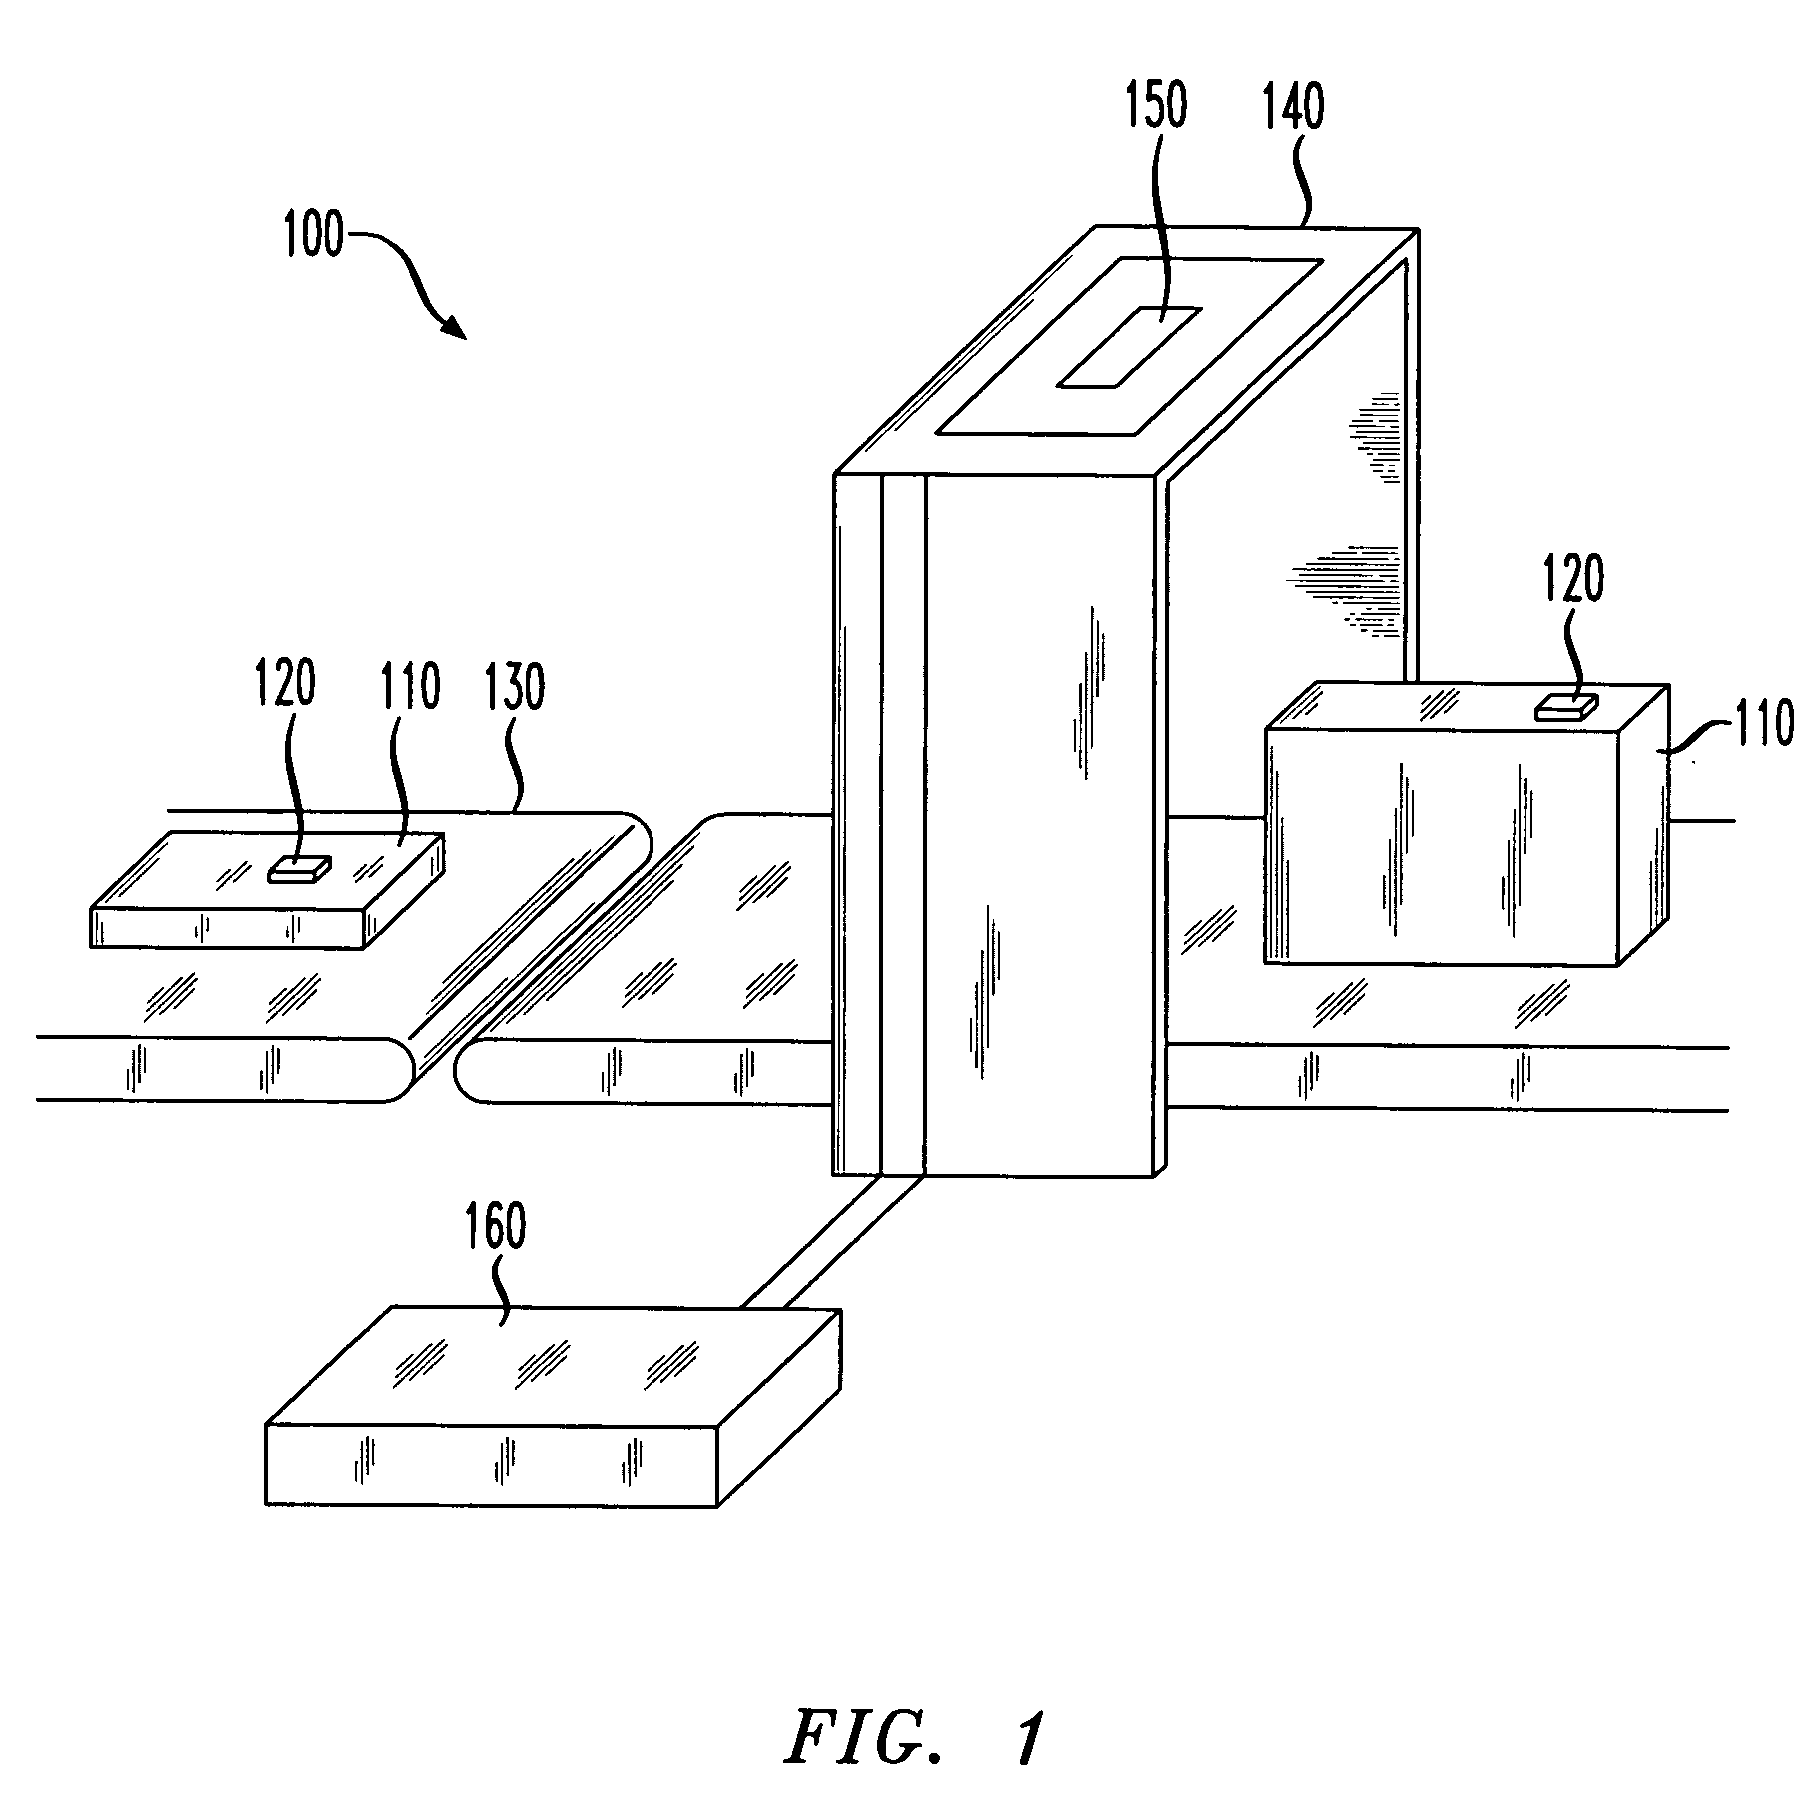 Multi-layer method of accommodating code collisions from multiple surface acoustic wave identification tags